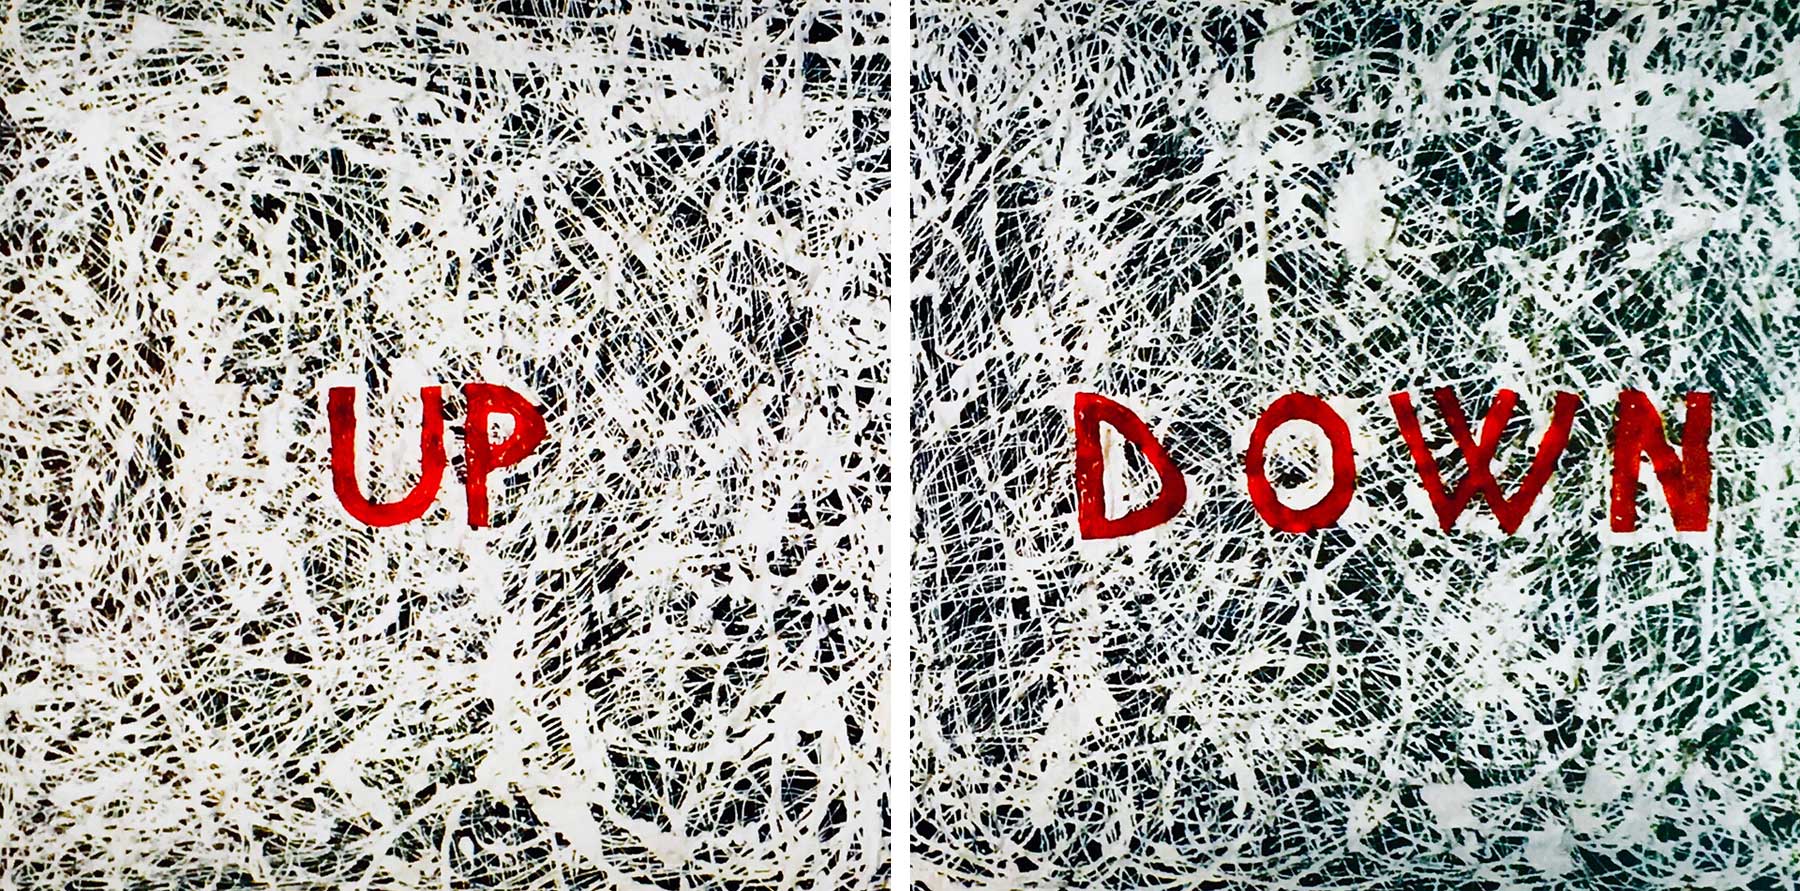 Up down, painting by Nicola Guerraz, acrylic and resin on canvas, diptych, 100 x 100 cm each, 2002